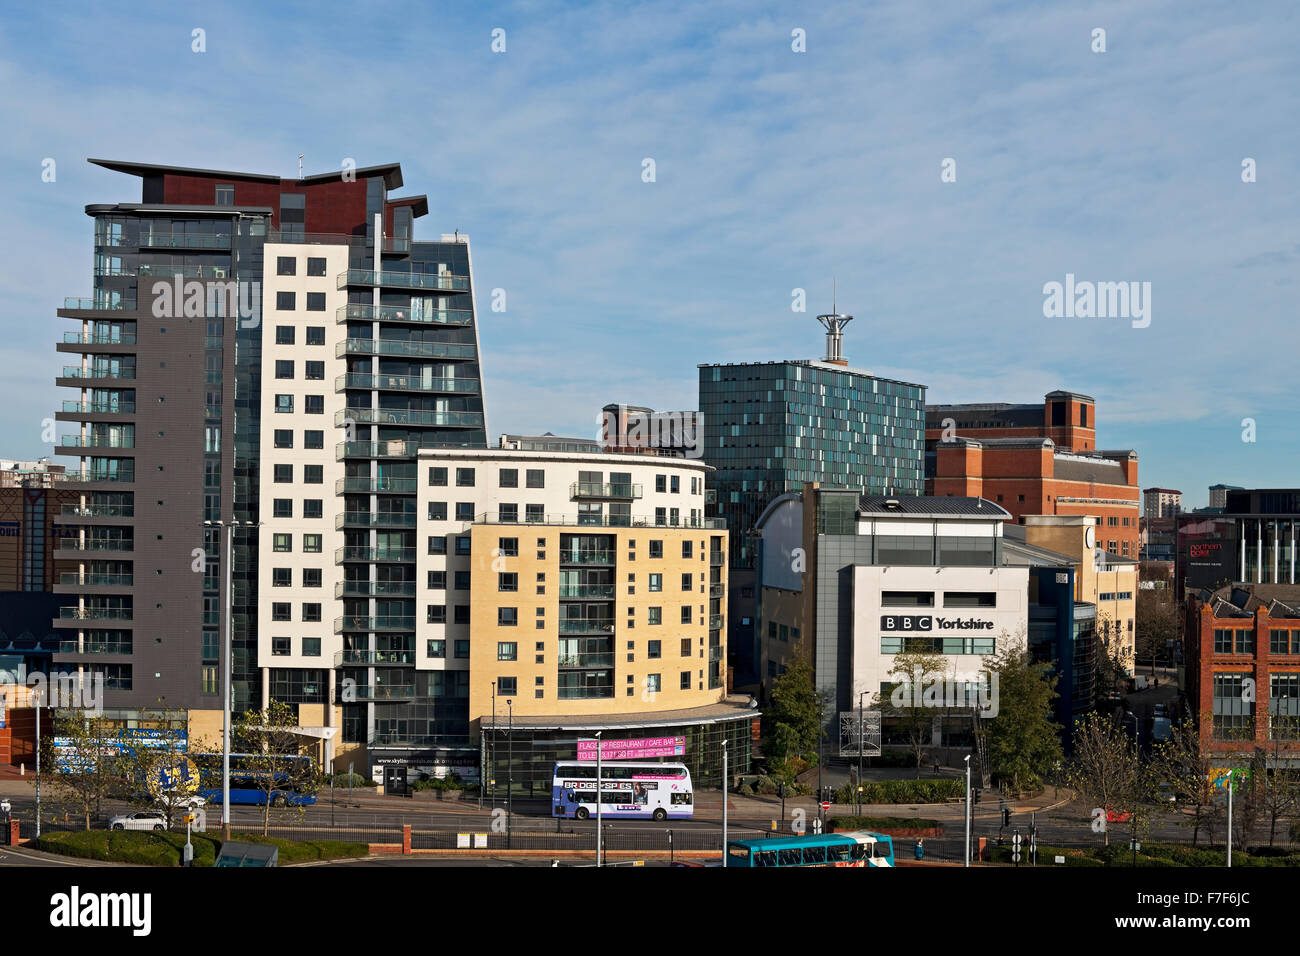 Tower blocks flats apartment block and BBC Yorkshire St Peter's Square Leeds West Yorkshire England UK United Kingdom GB Great Britain Stock Photo